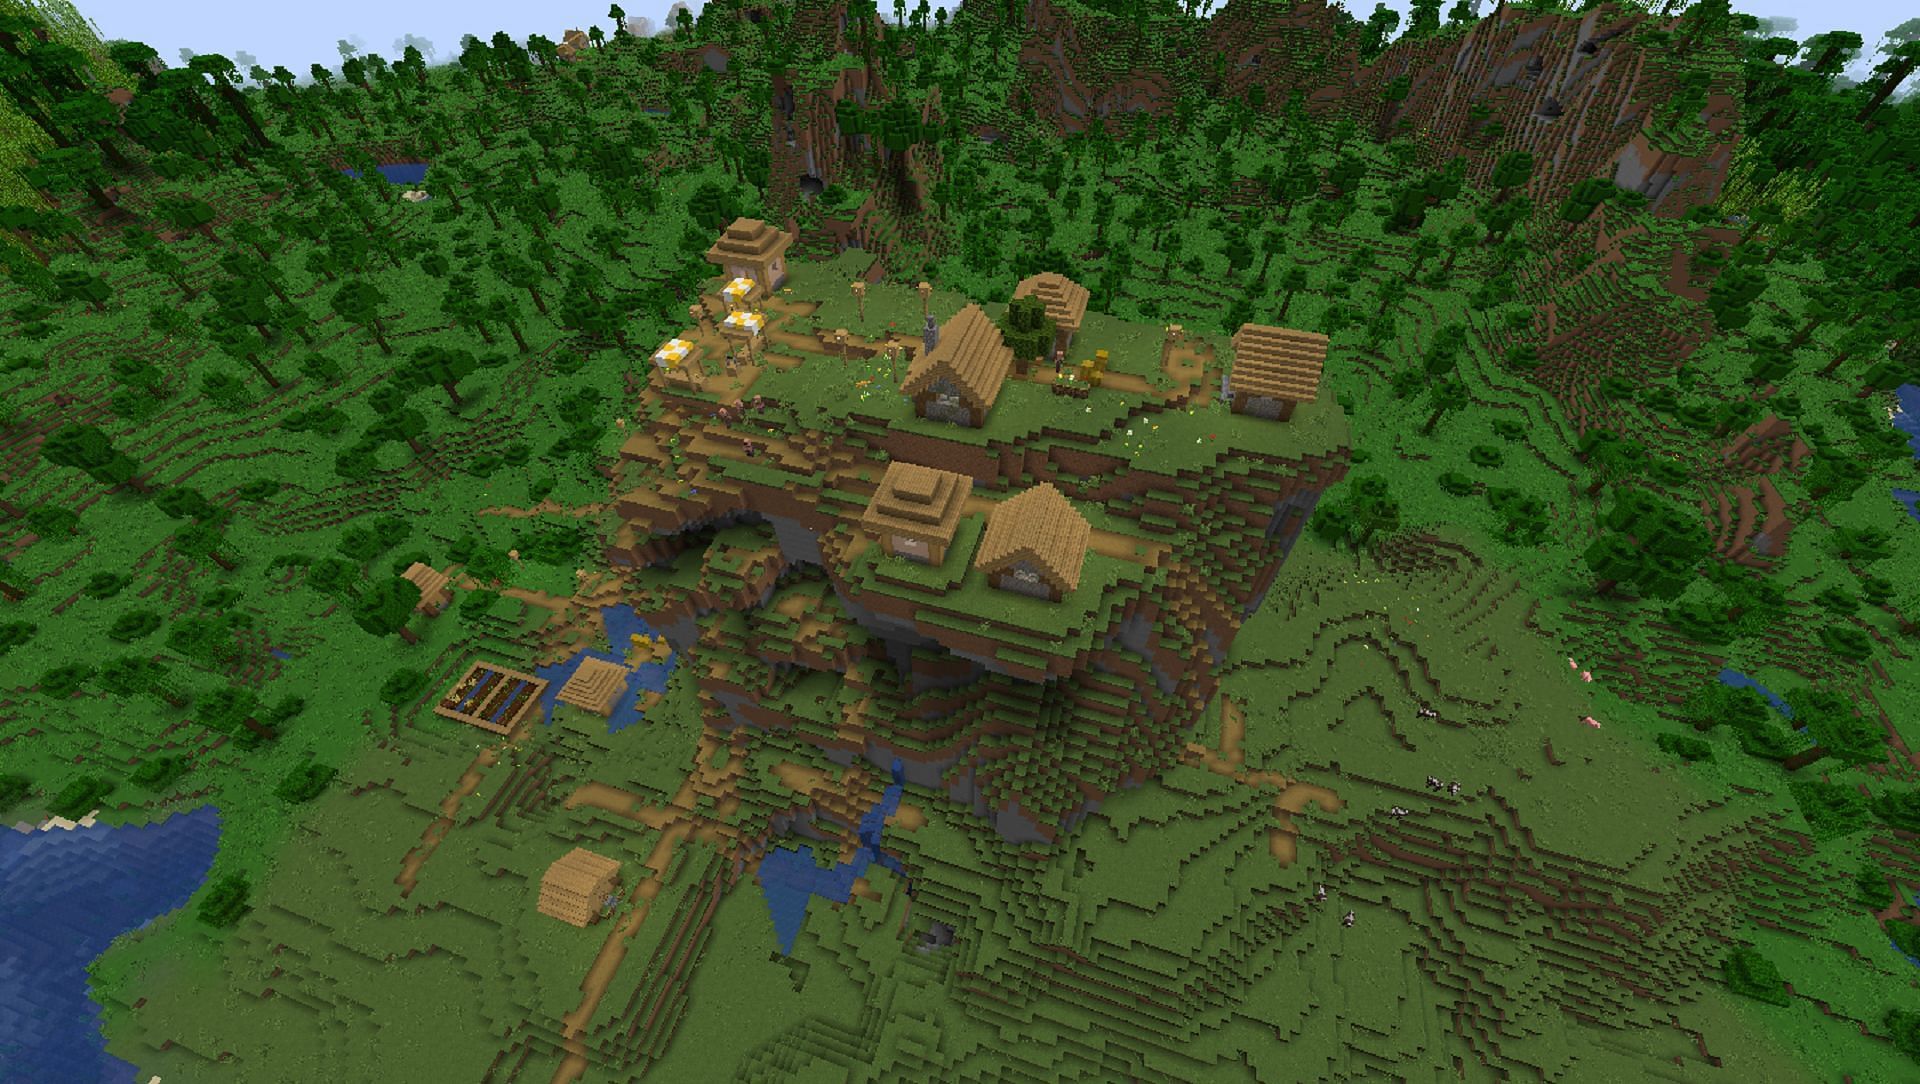 Minecraft fans will find a great starting village right at spawn in this seed (Image via Mojang)